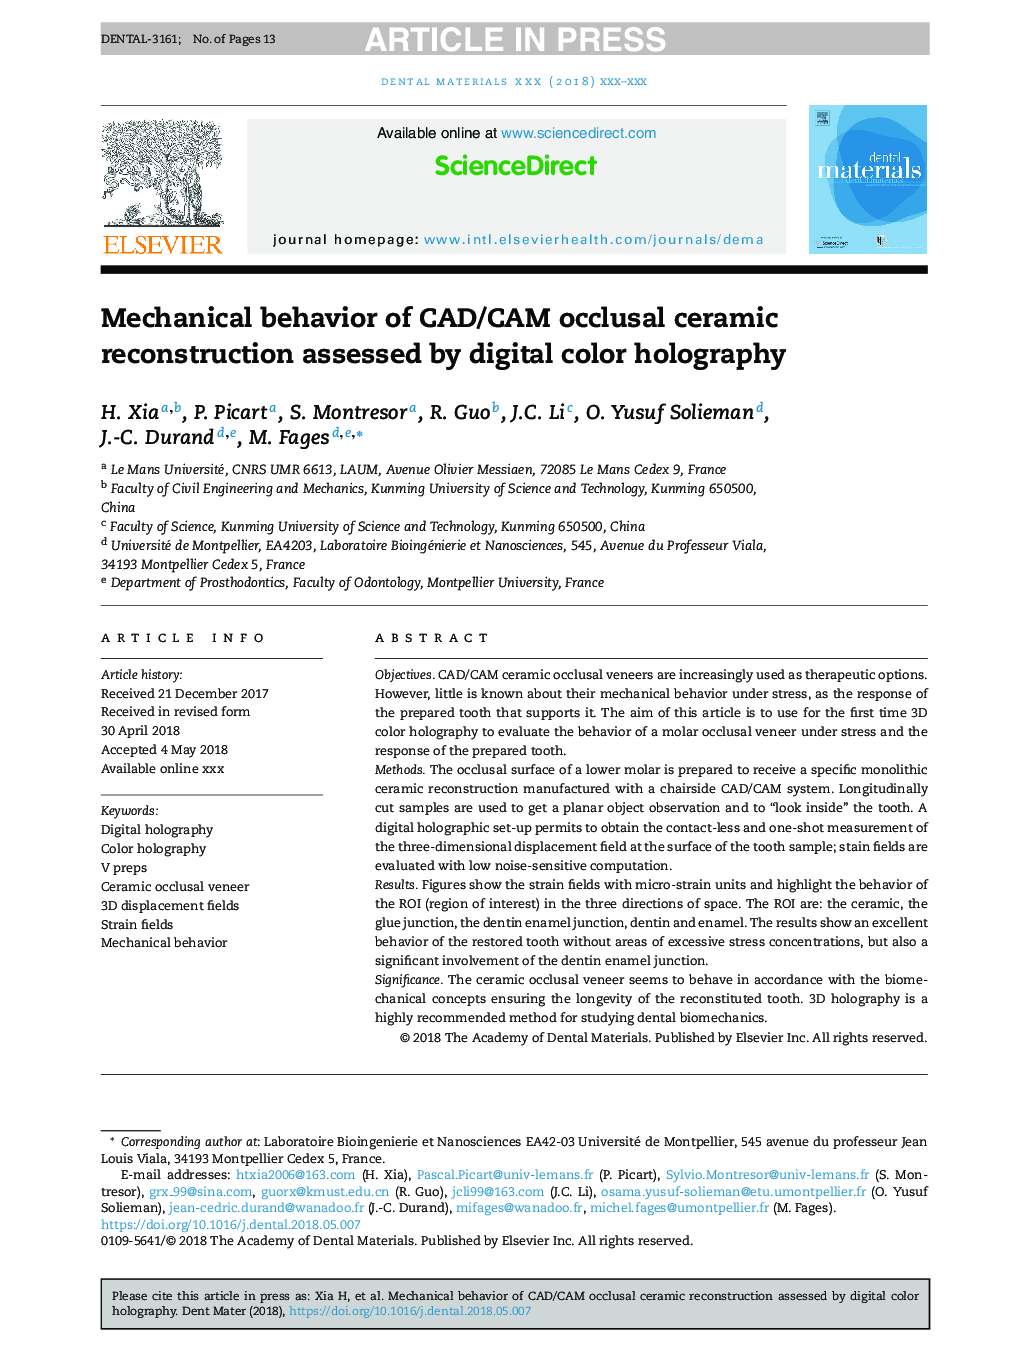 Mechanical behavior of CAD/CAM occlusal ceramic reconstruction assessed by digital color holography